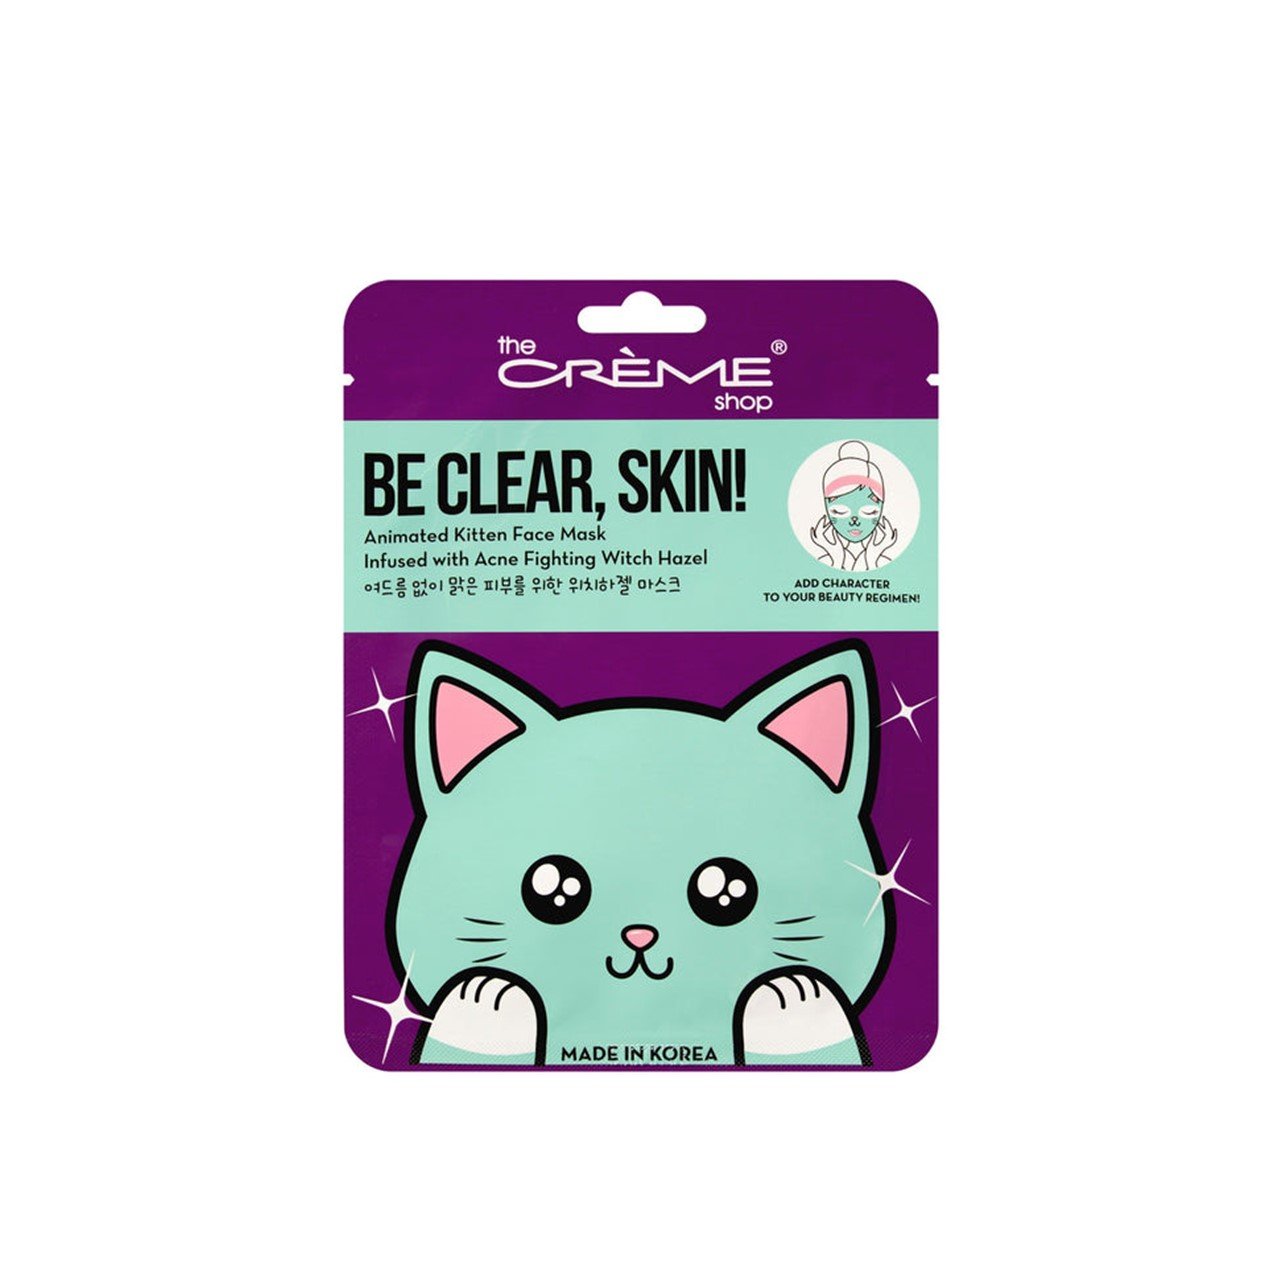 The Crème Shop Be Clear, Skin! Animated Kitten Face Mask 25g